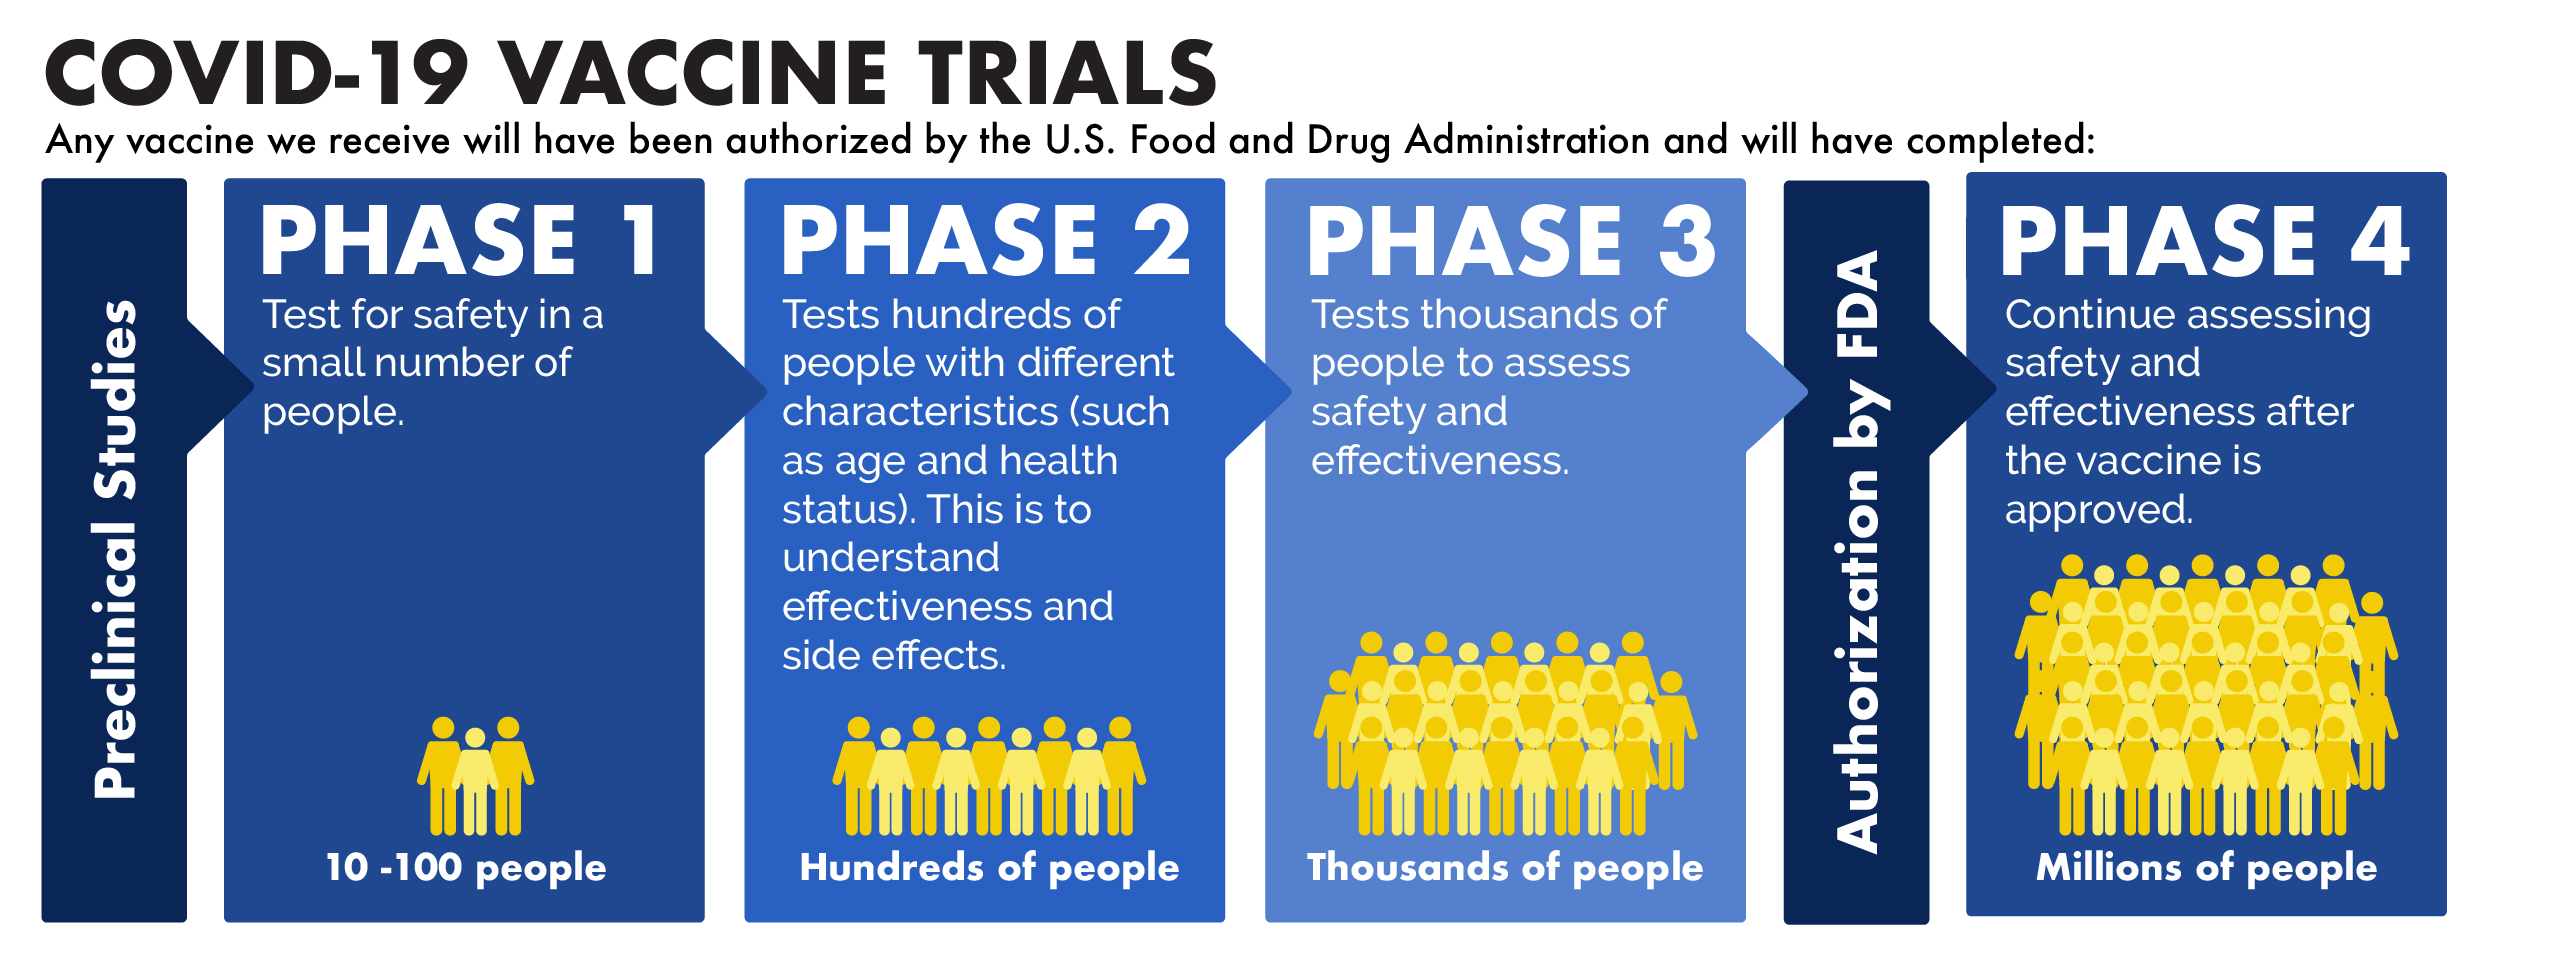 Any vaccine we receive will have been authorized by the FDA nd hile have completed three phases of pretrial studies.